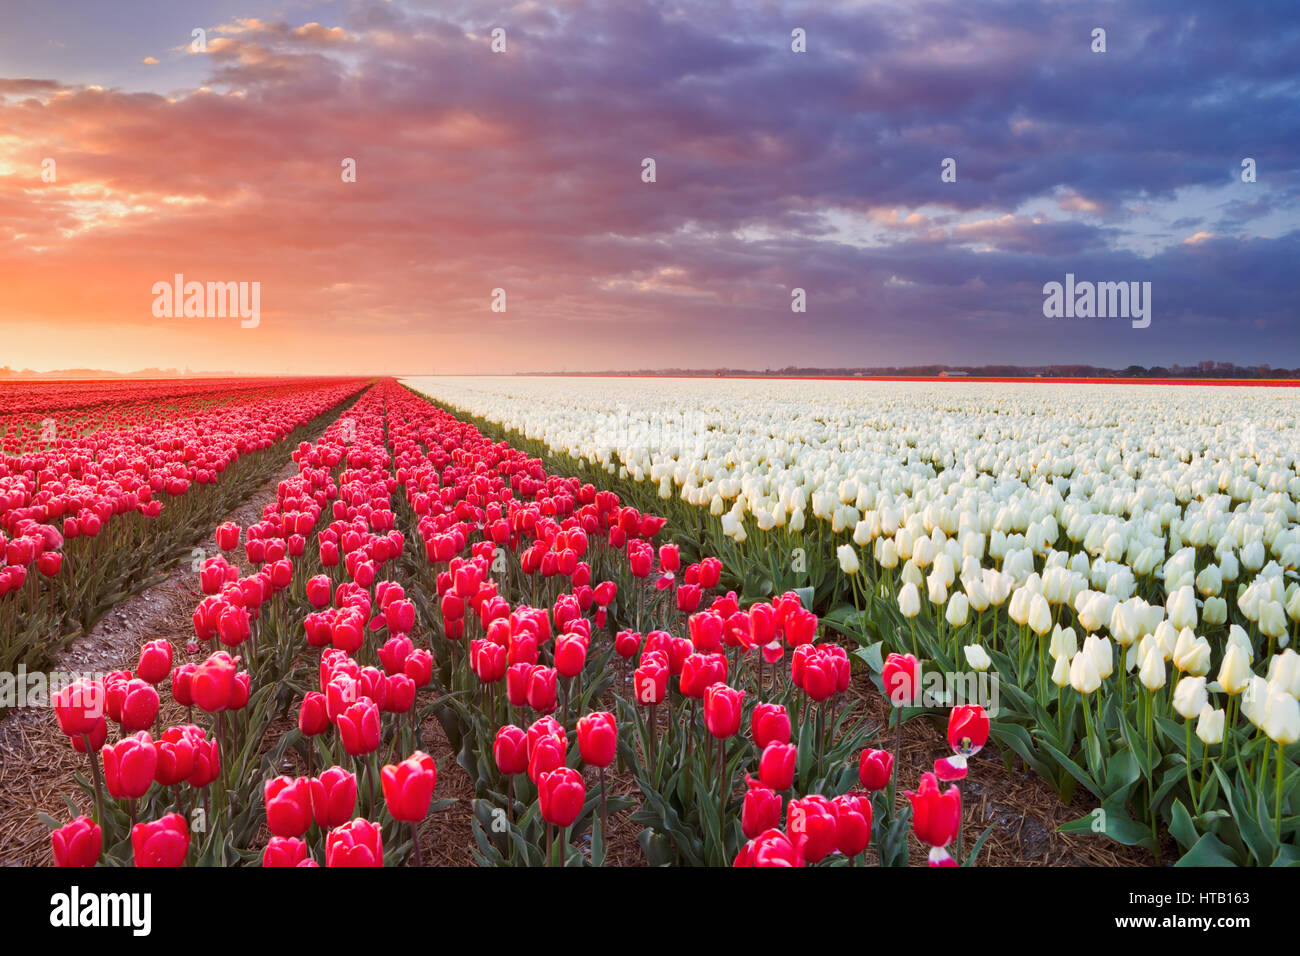 Rows of colourful tulips at sunrise near Alkmaar in The Netherlands. Stock Photo